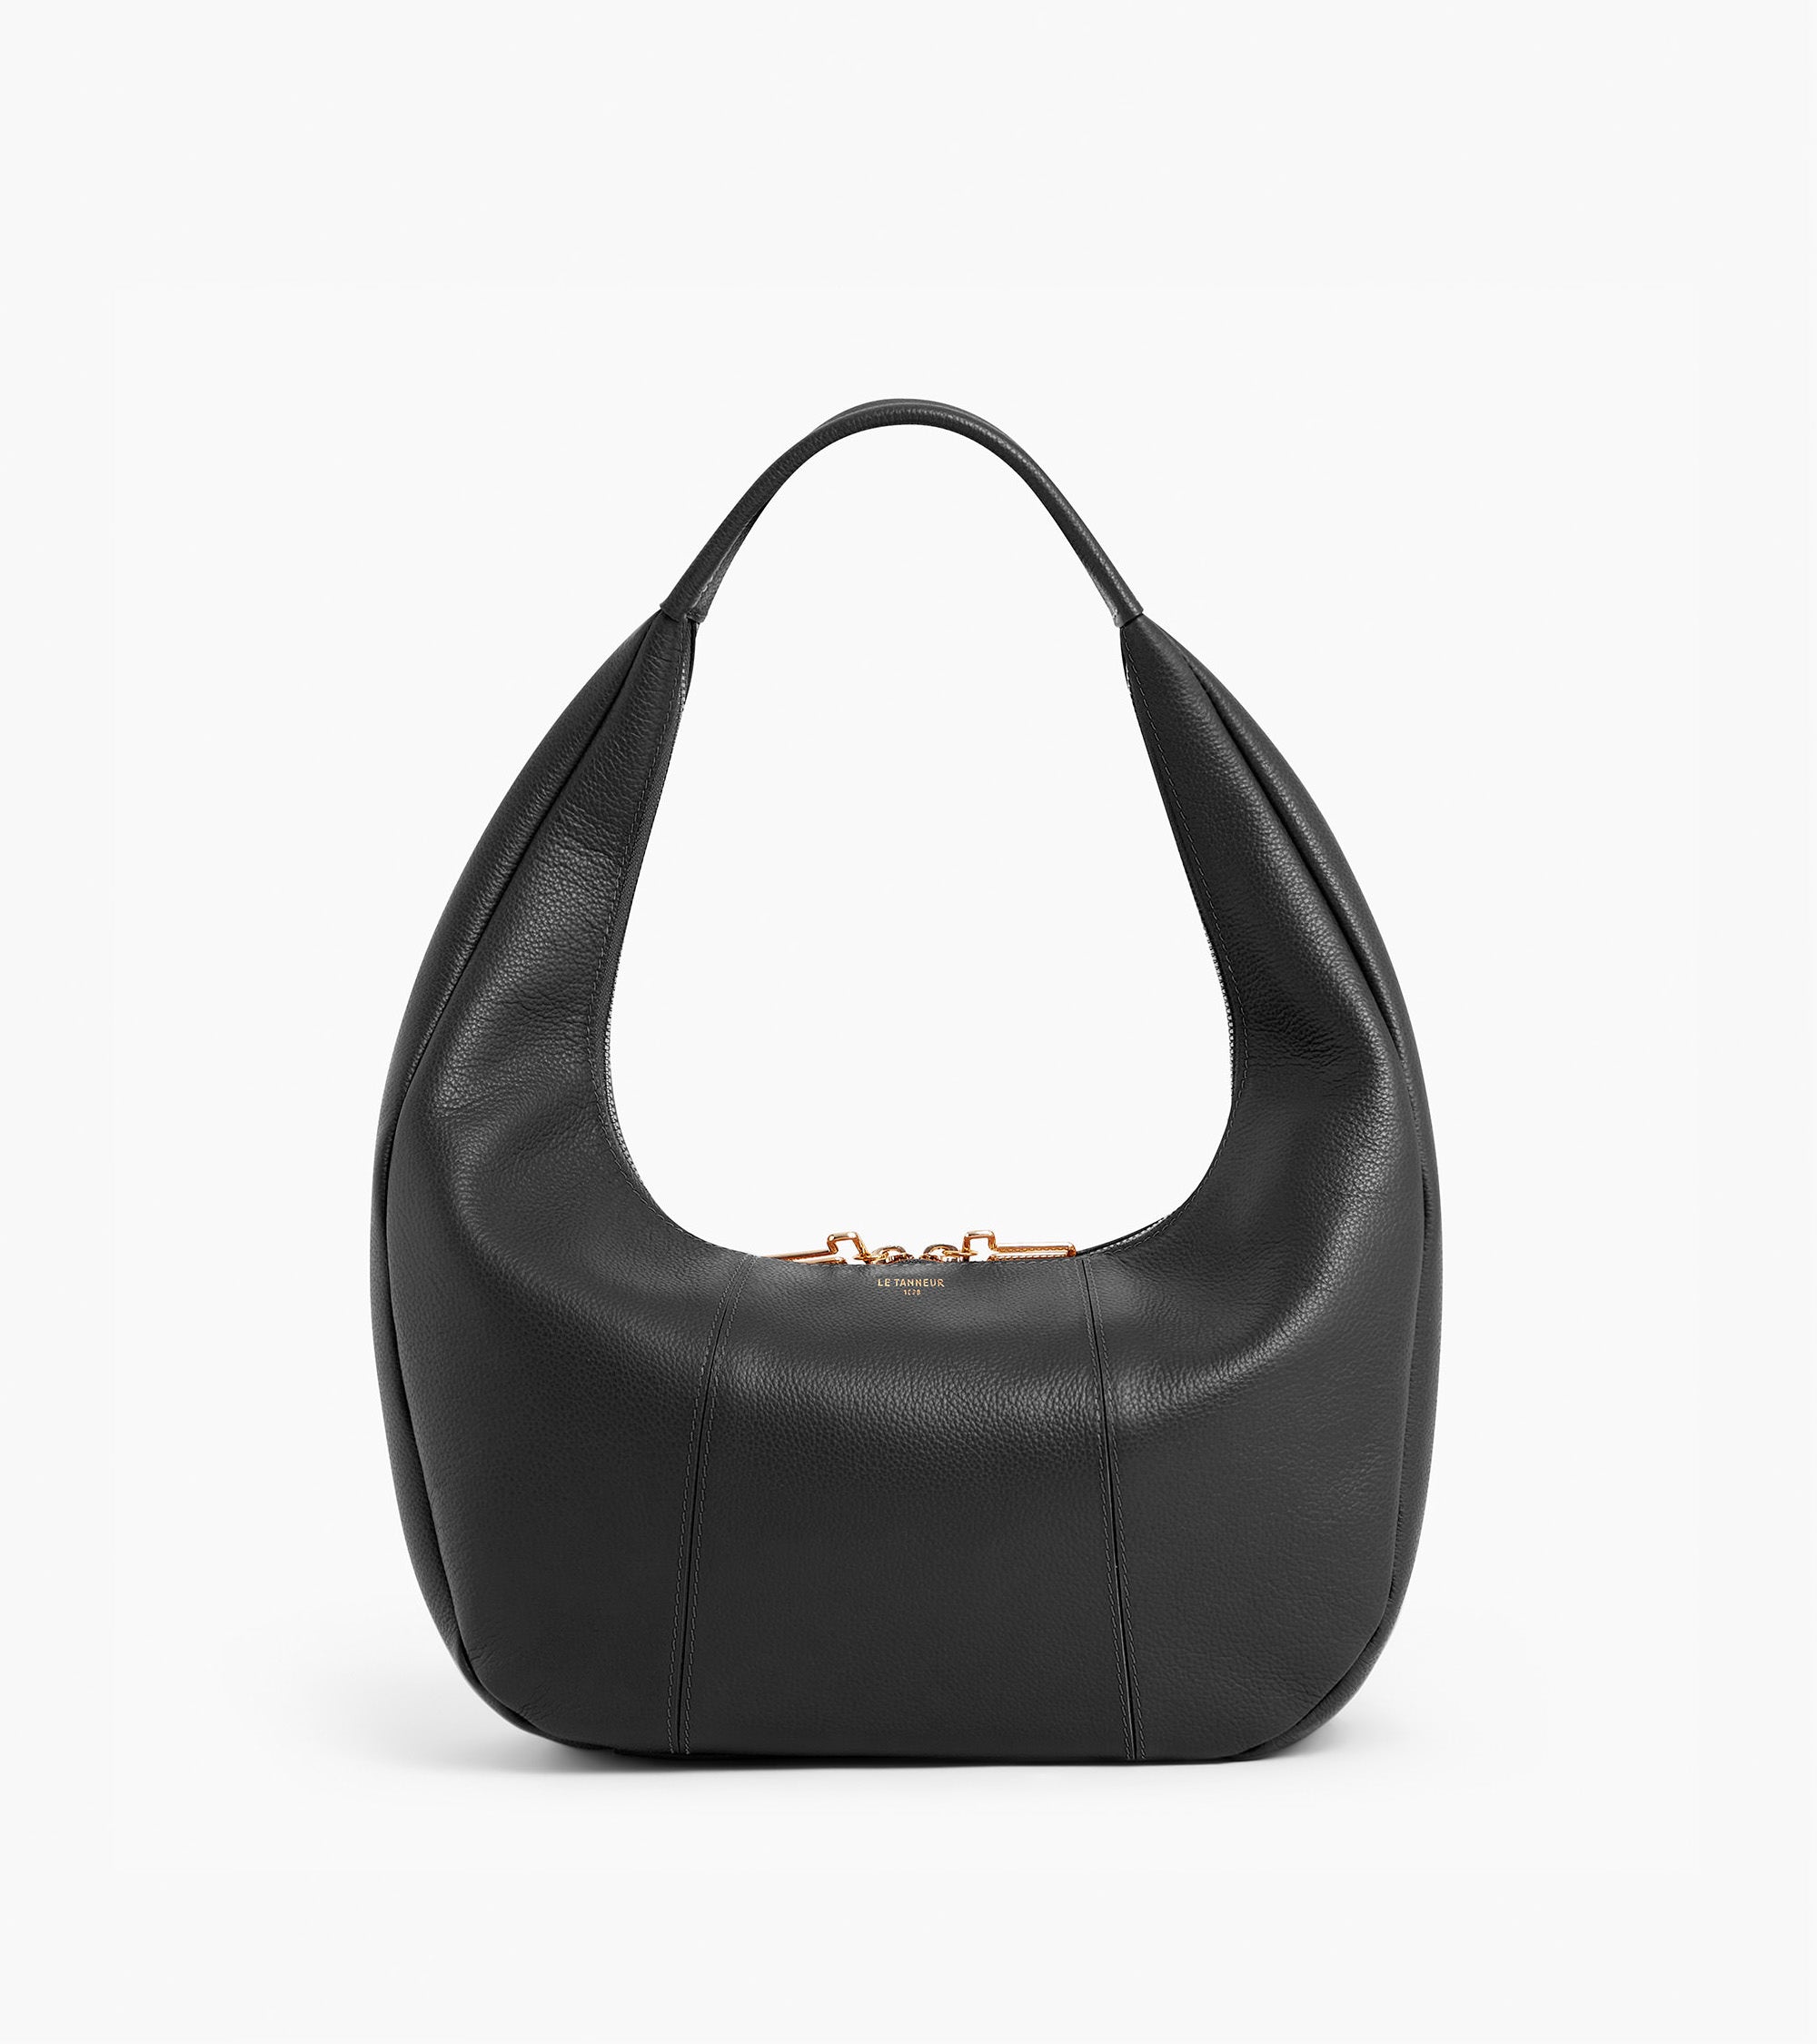 Juliette large hobo bag in grained leather